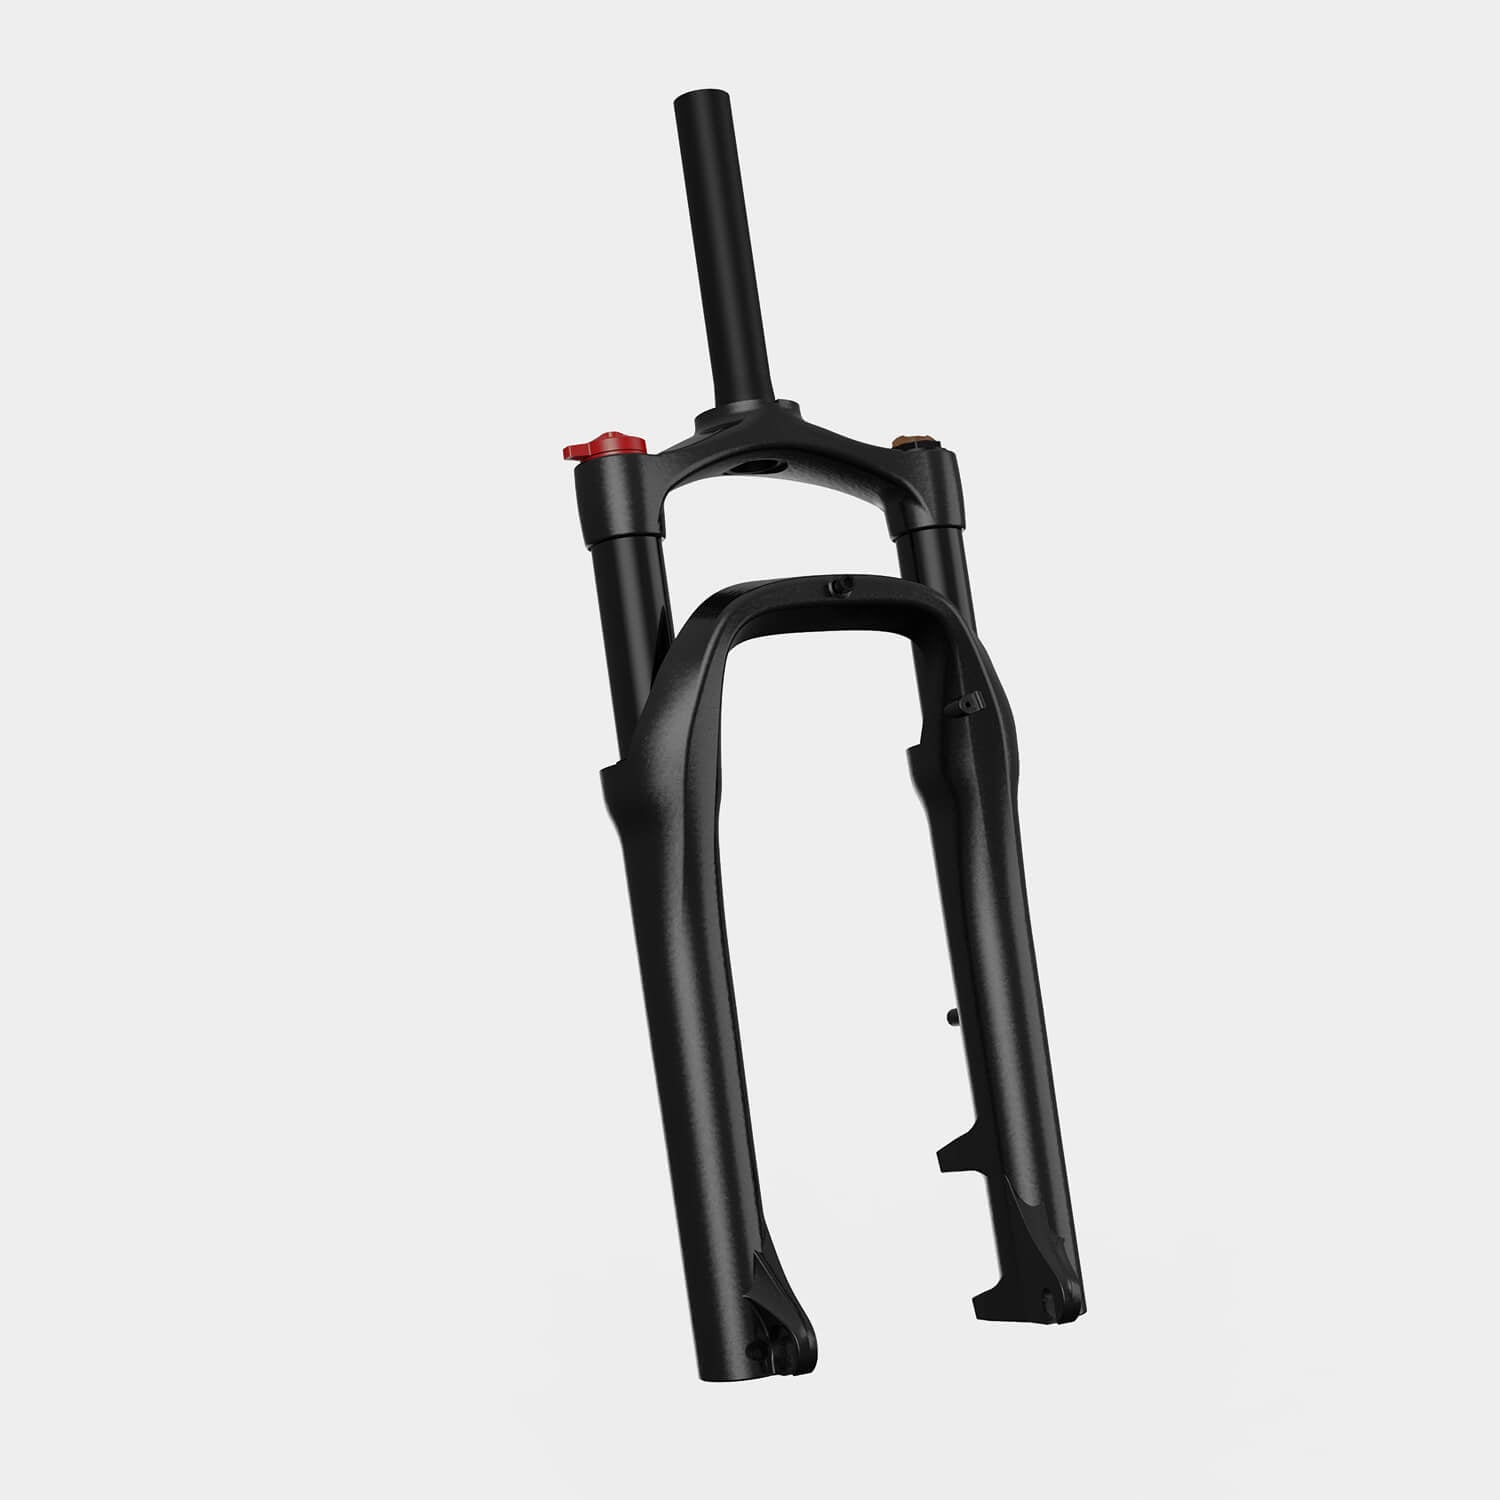 Electric bicycle-front fork design can reduce the discomfort caused by braking and give you a comfortable riding experience. For Wallke H6.Wallke H6S.Wallke H6 ST.Wallke H6 STL.Wallke X3 Pro